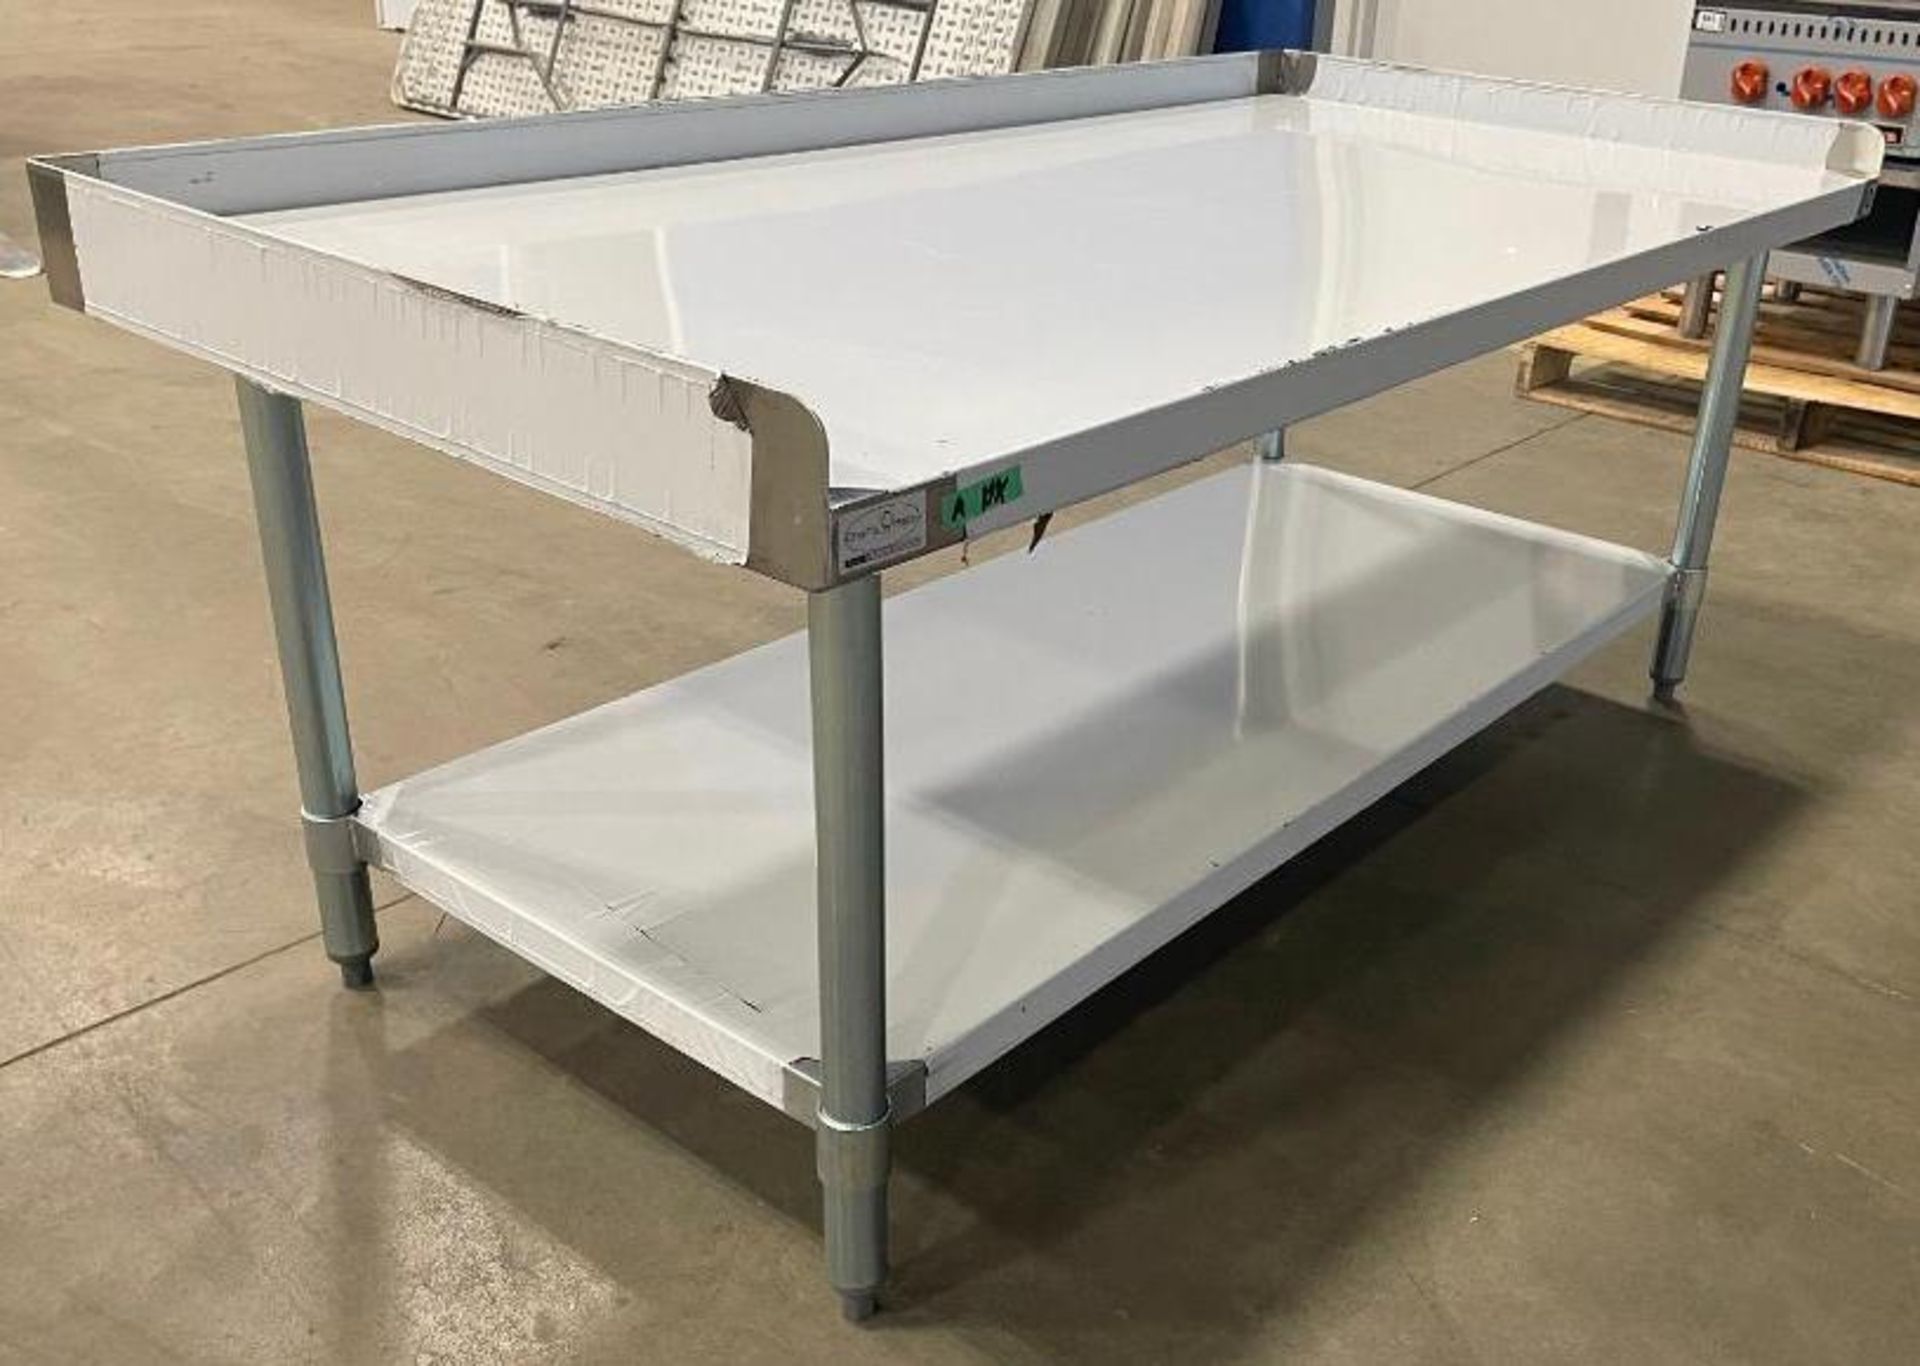 CHEF'S MATE 30" X 60" STAINLESS STEEL EQUIPMENT STAND - NEW - Image 2 of 13